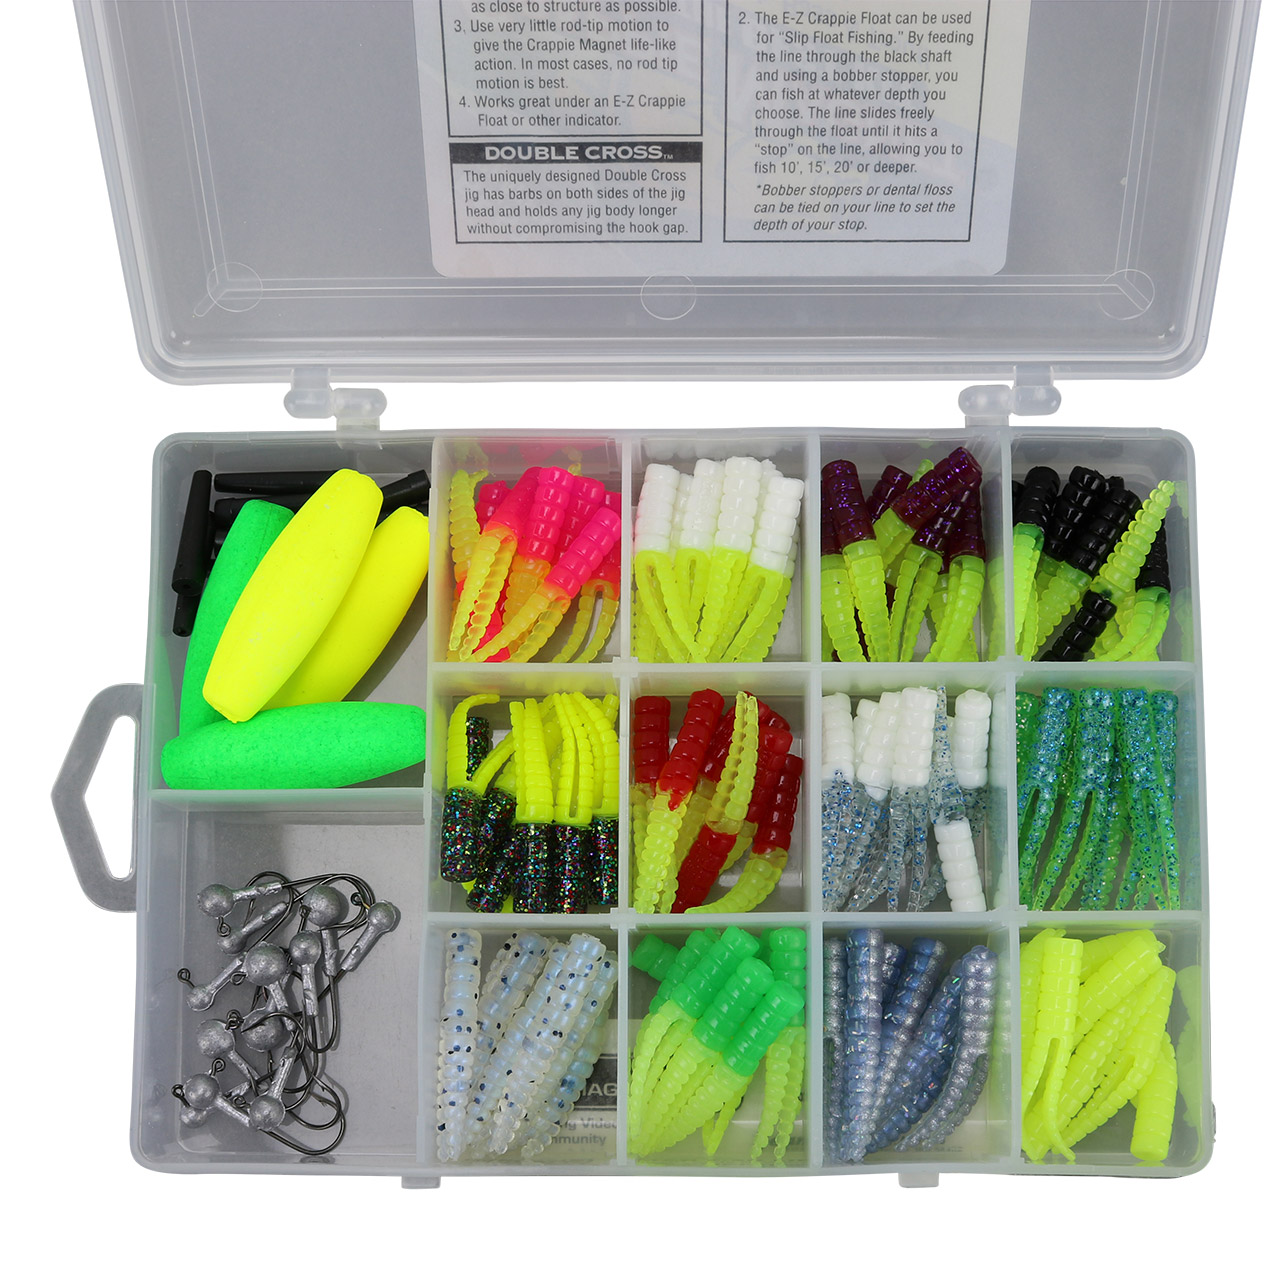 Leland's Lures Crappie Magnet Best of the Best Kit